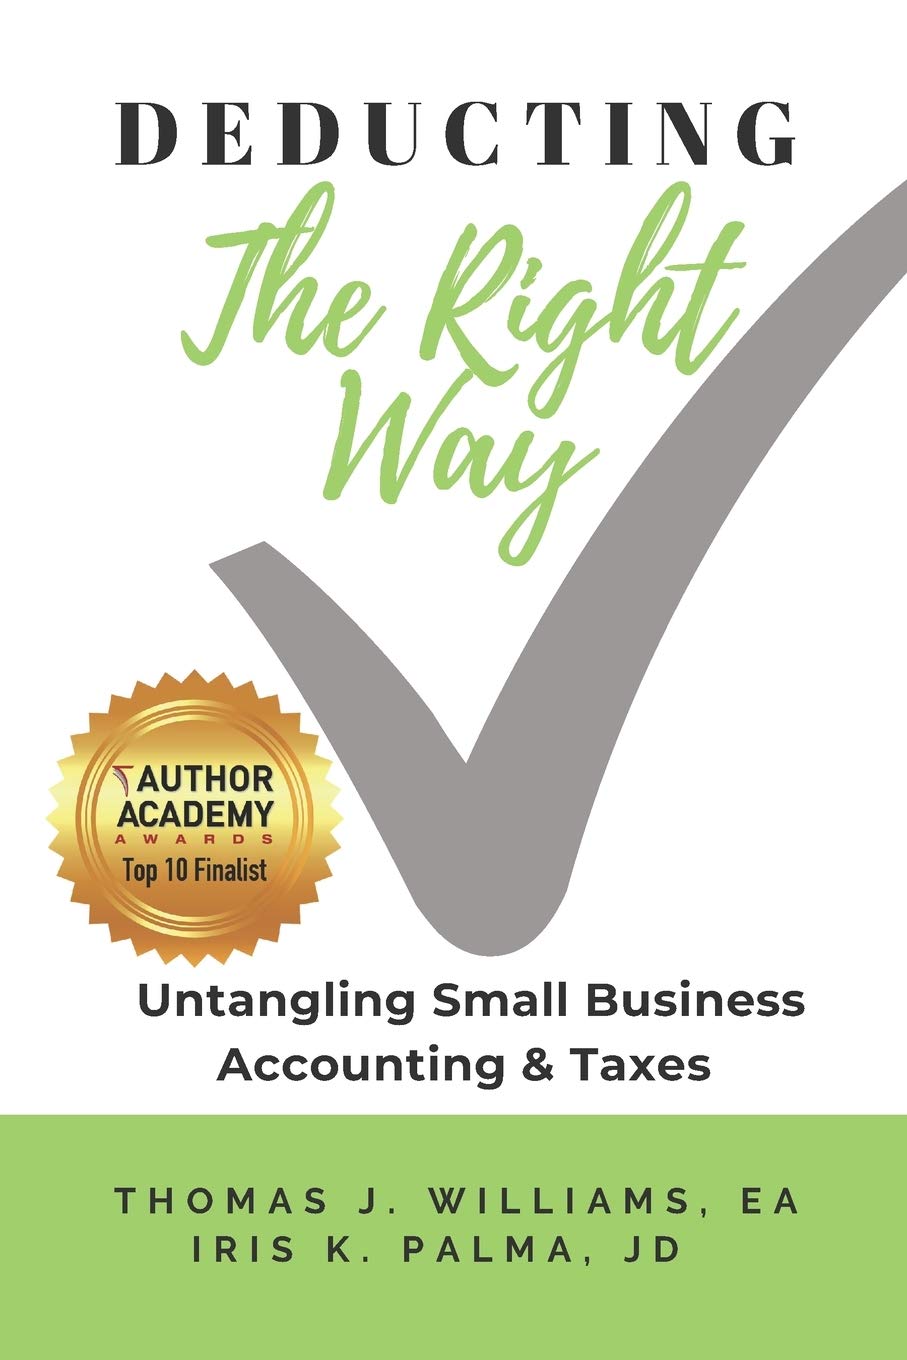 bookkeeping books for managers